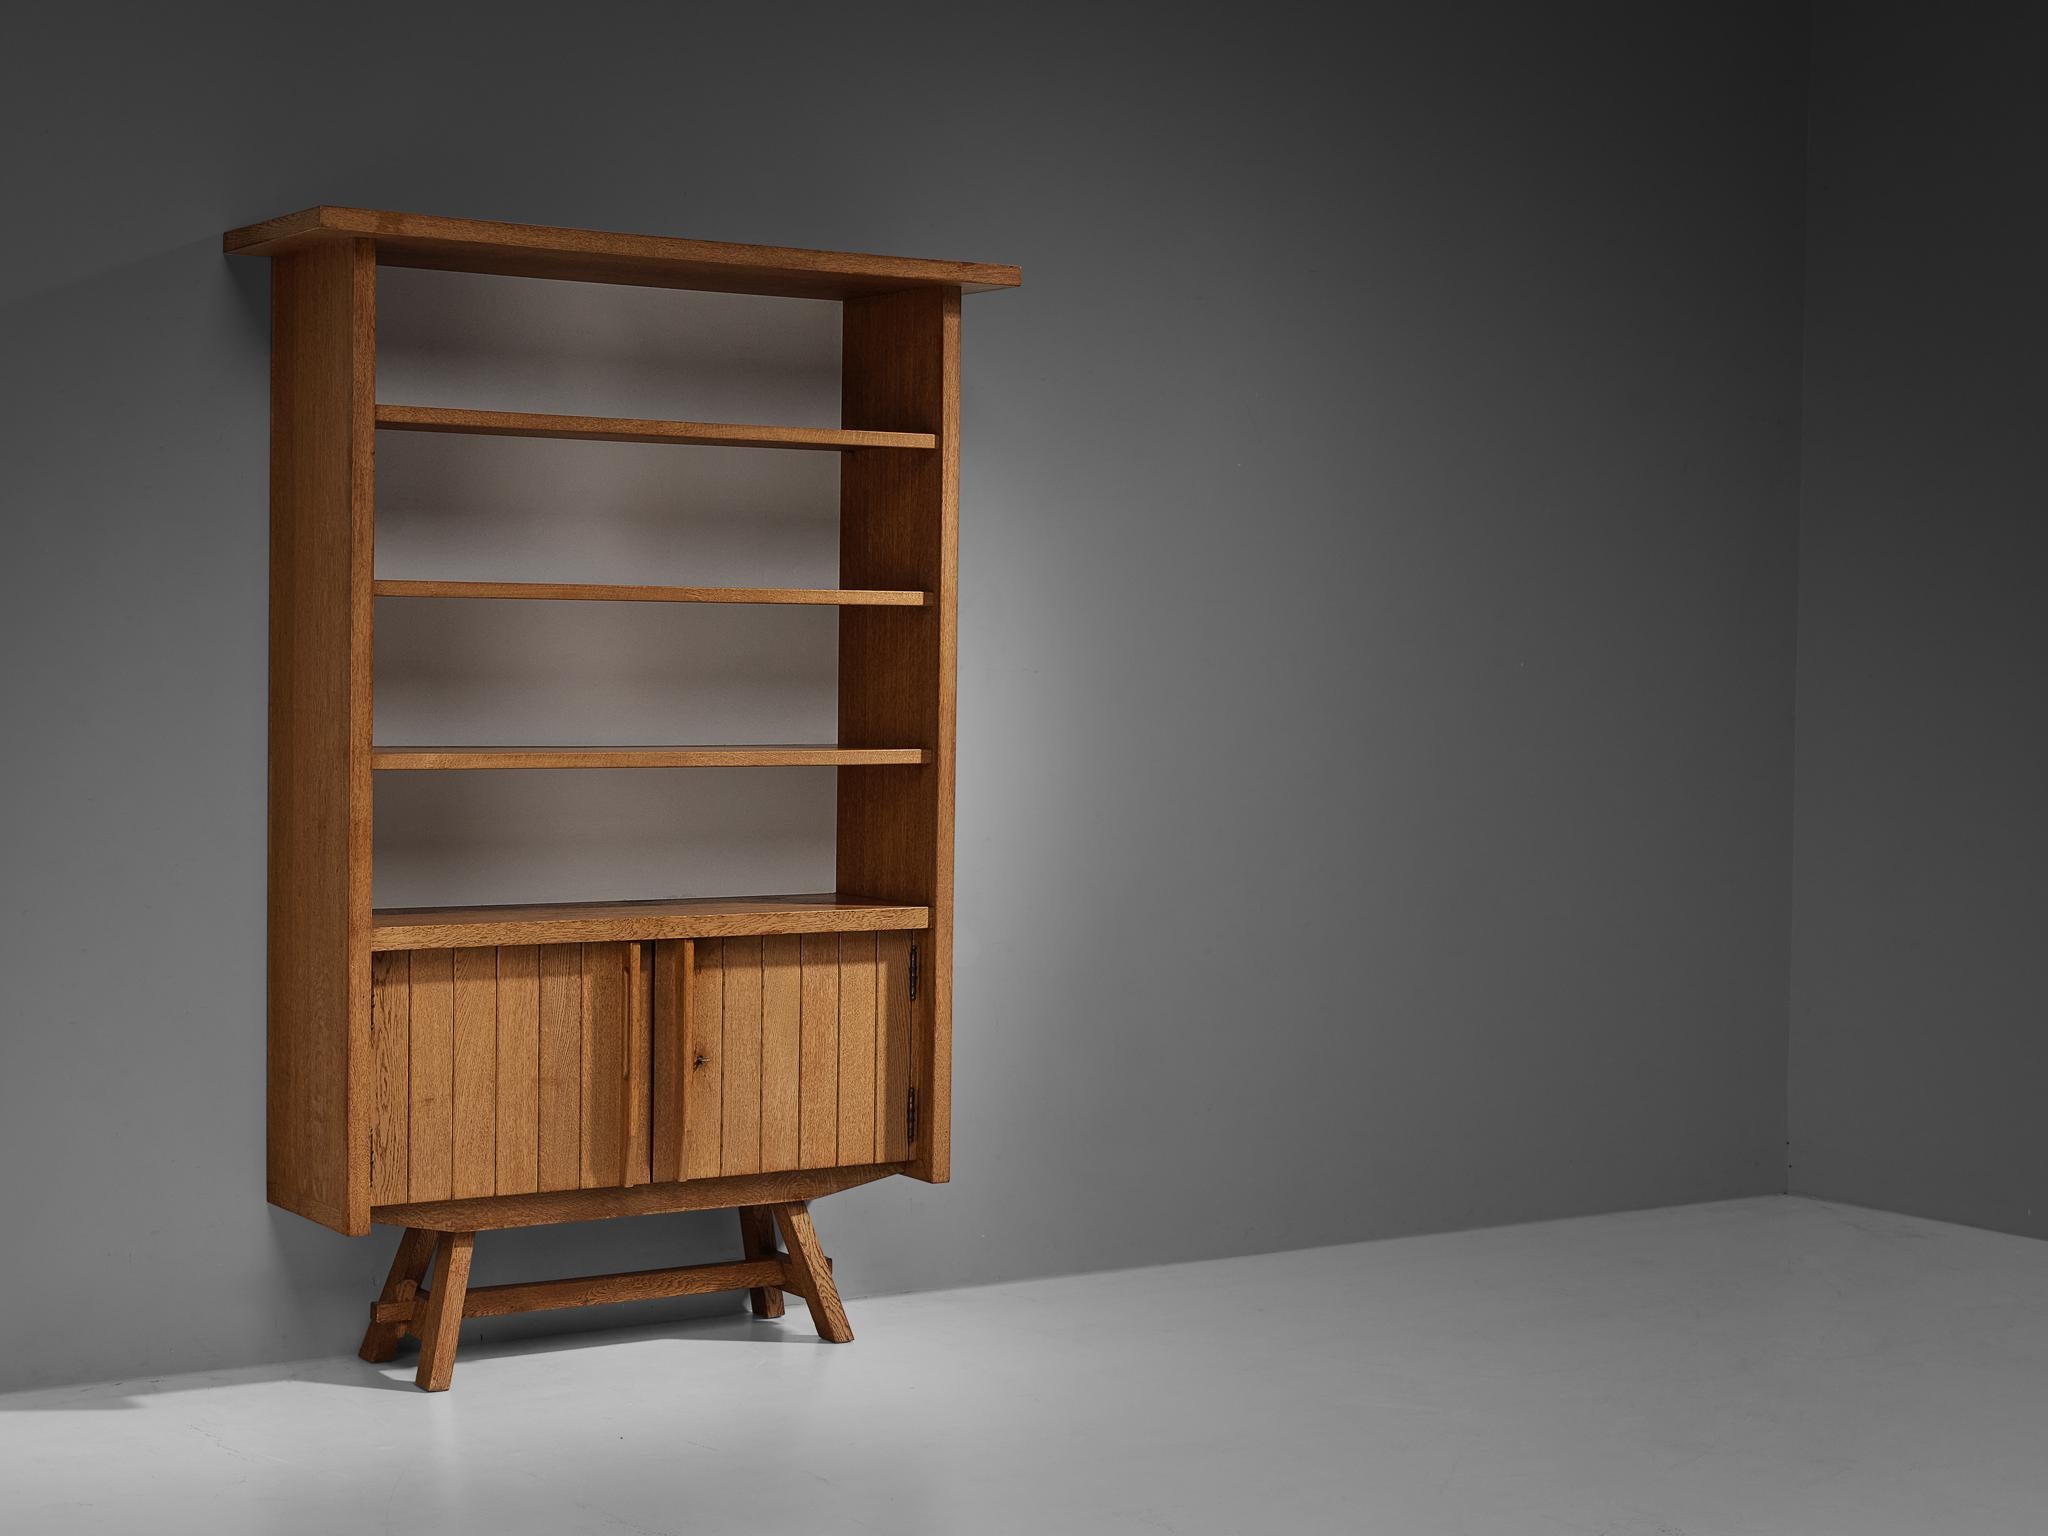 Cupboard, oak, metal, lacquered wood, France, 1960s.

This piece of furniture can be used for various occasions. You can use it as a vitrine to showcase your valued belongings, such as books, glassware, and artistic objects. Or the cabinet can serve